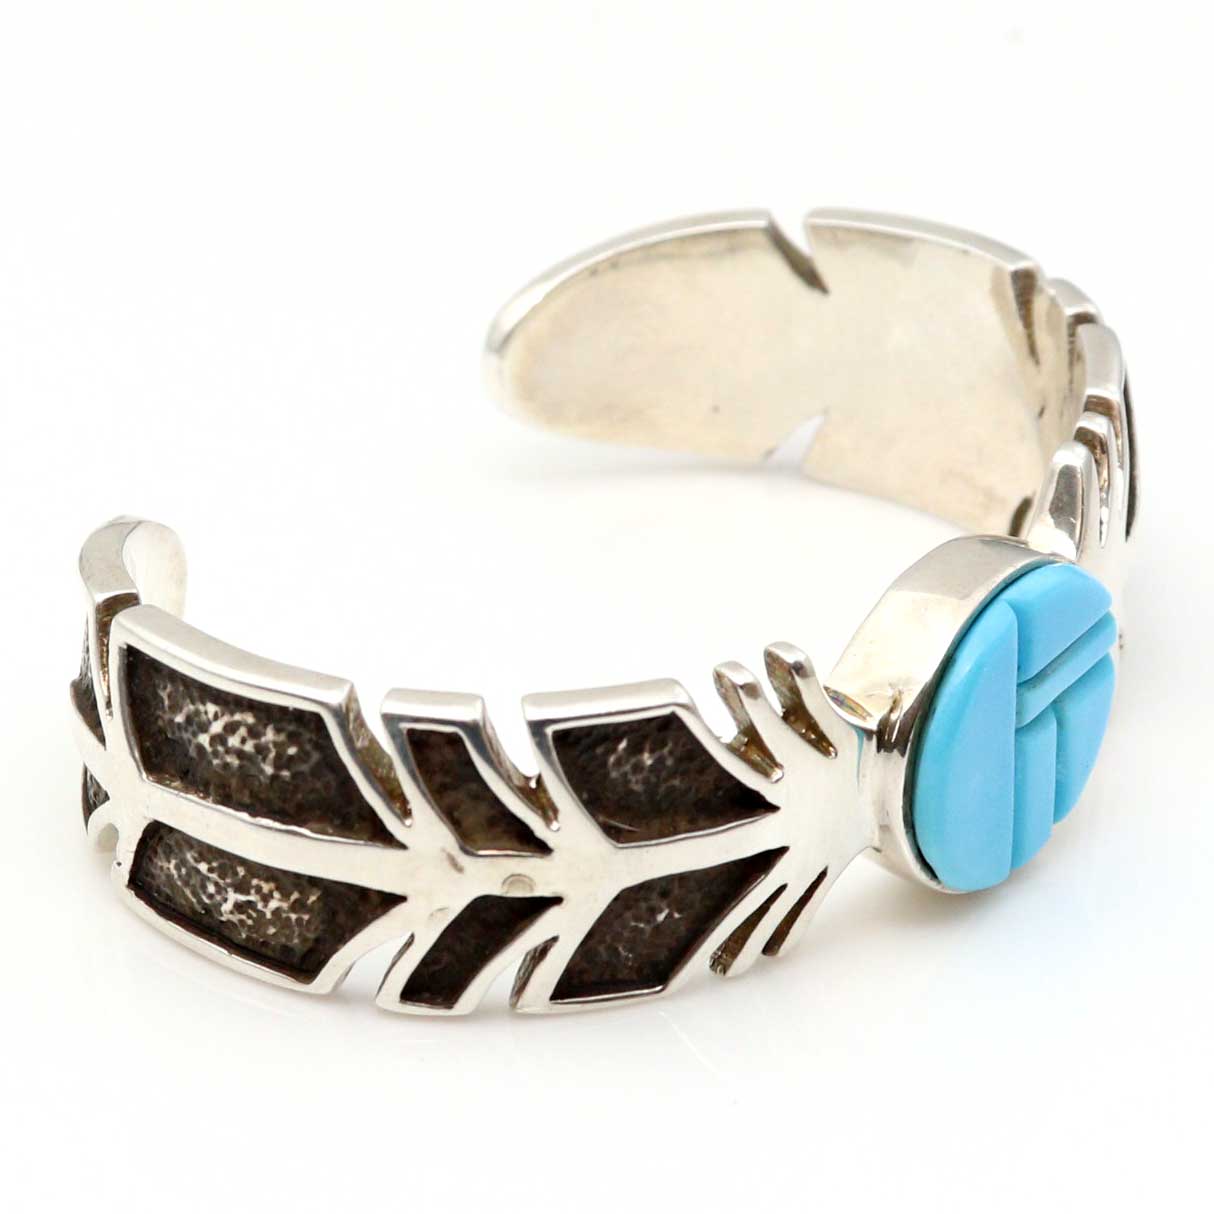 Turquoise Feather Bracelet by Super Smiths